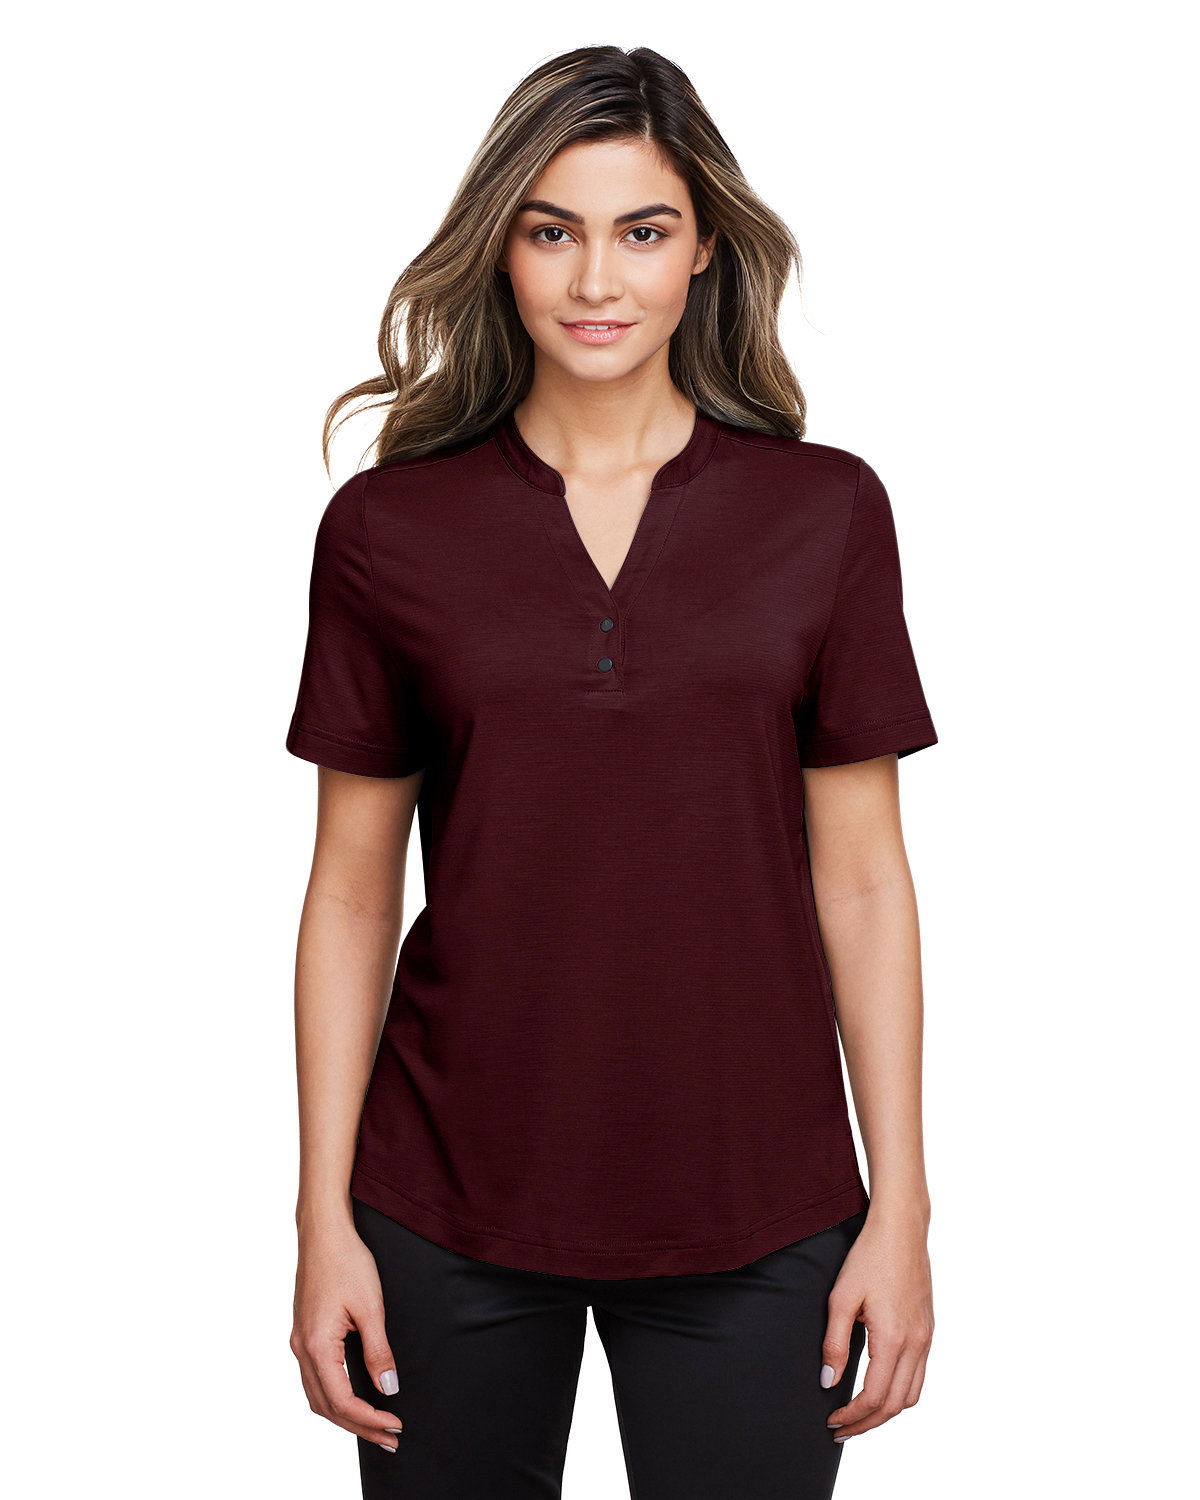 North End Ladies' Jaq Snap-Up Stretch Performance Polo burgundy 